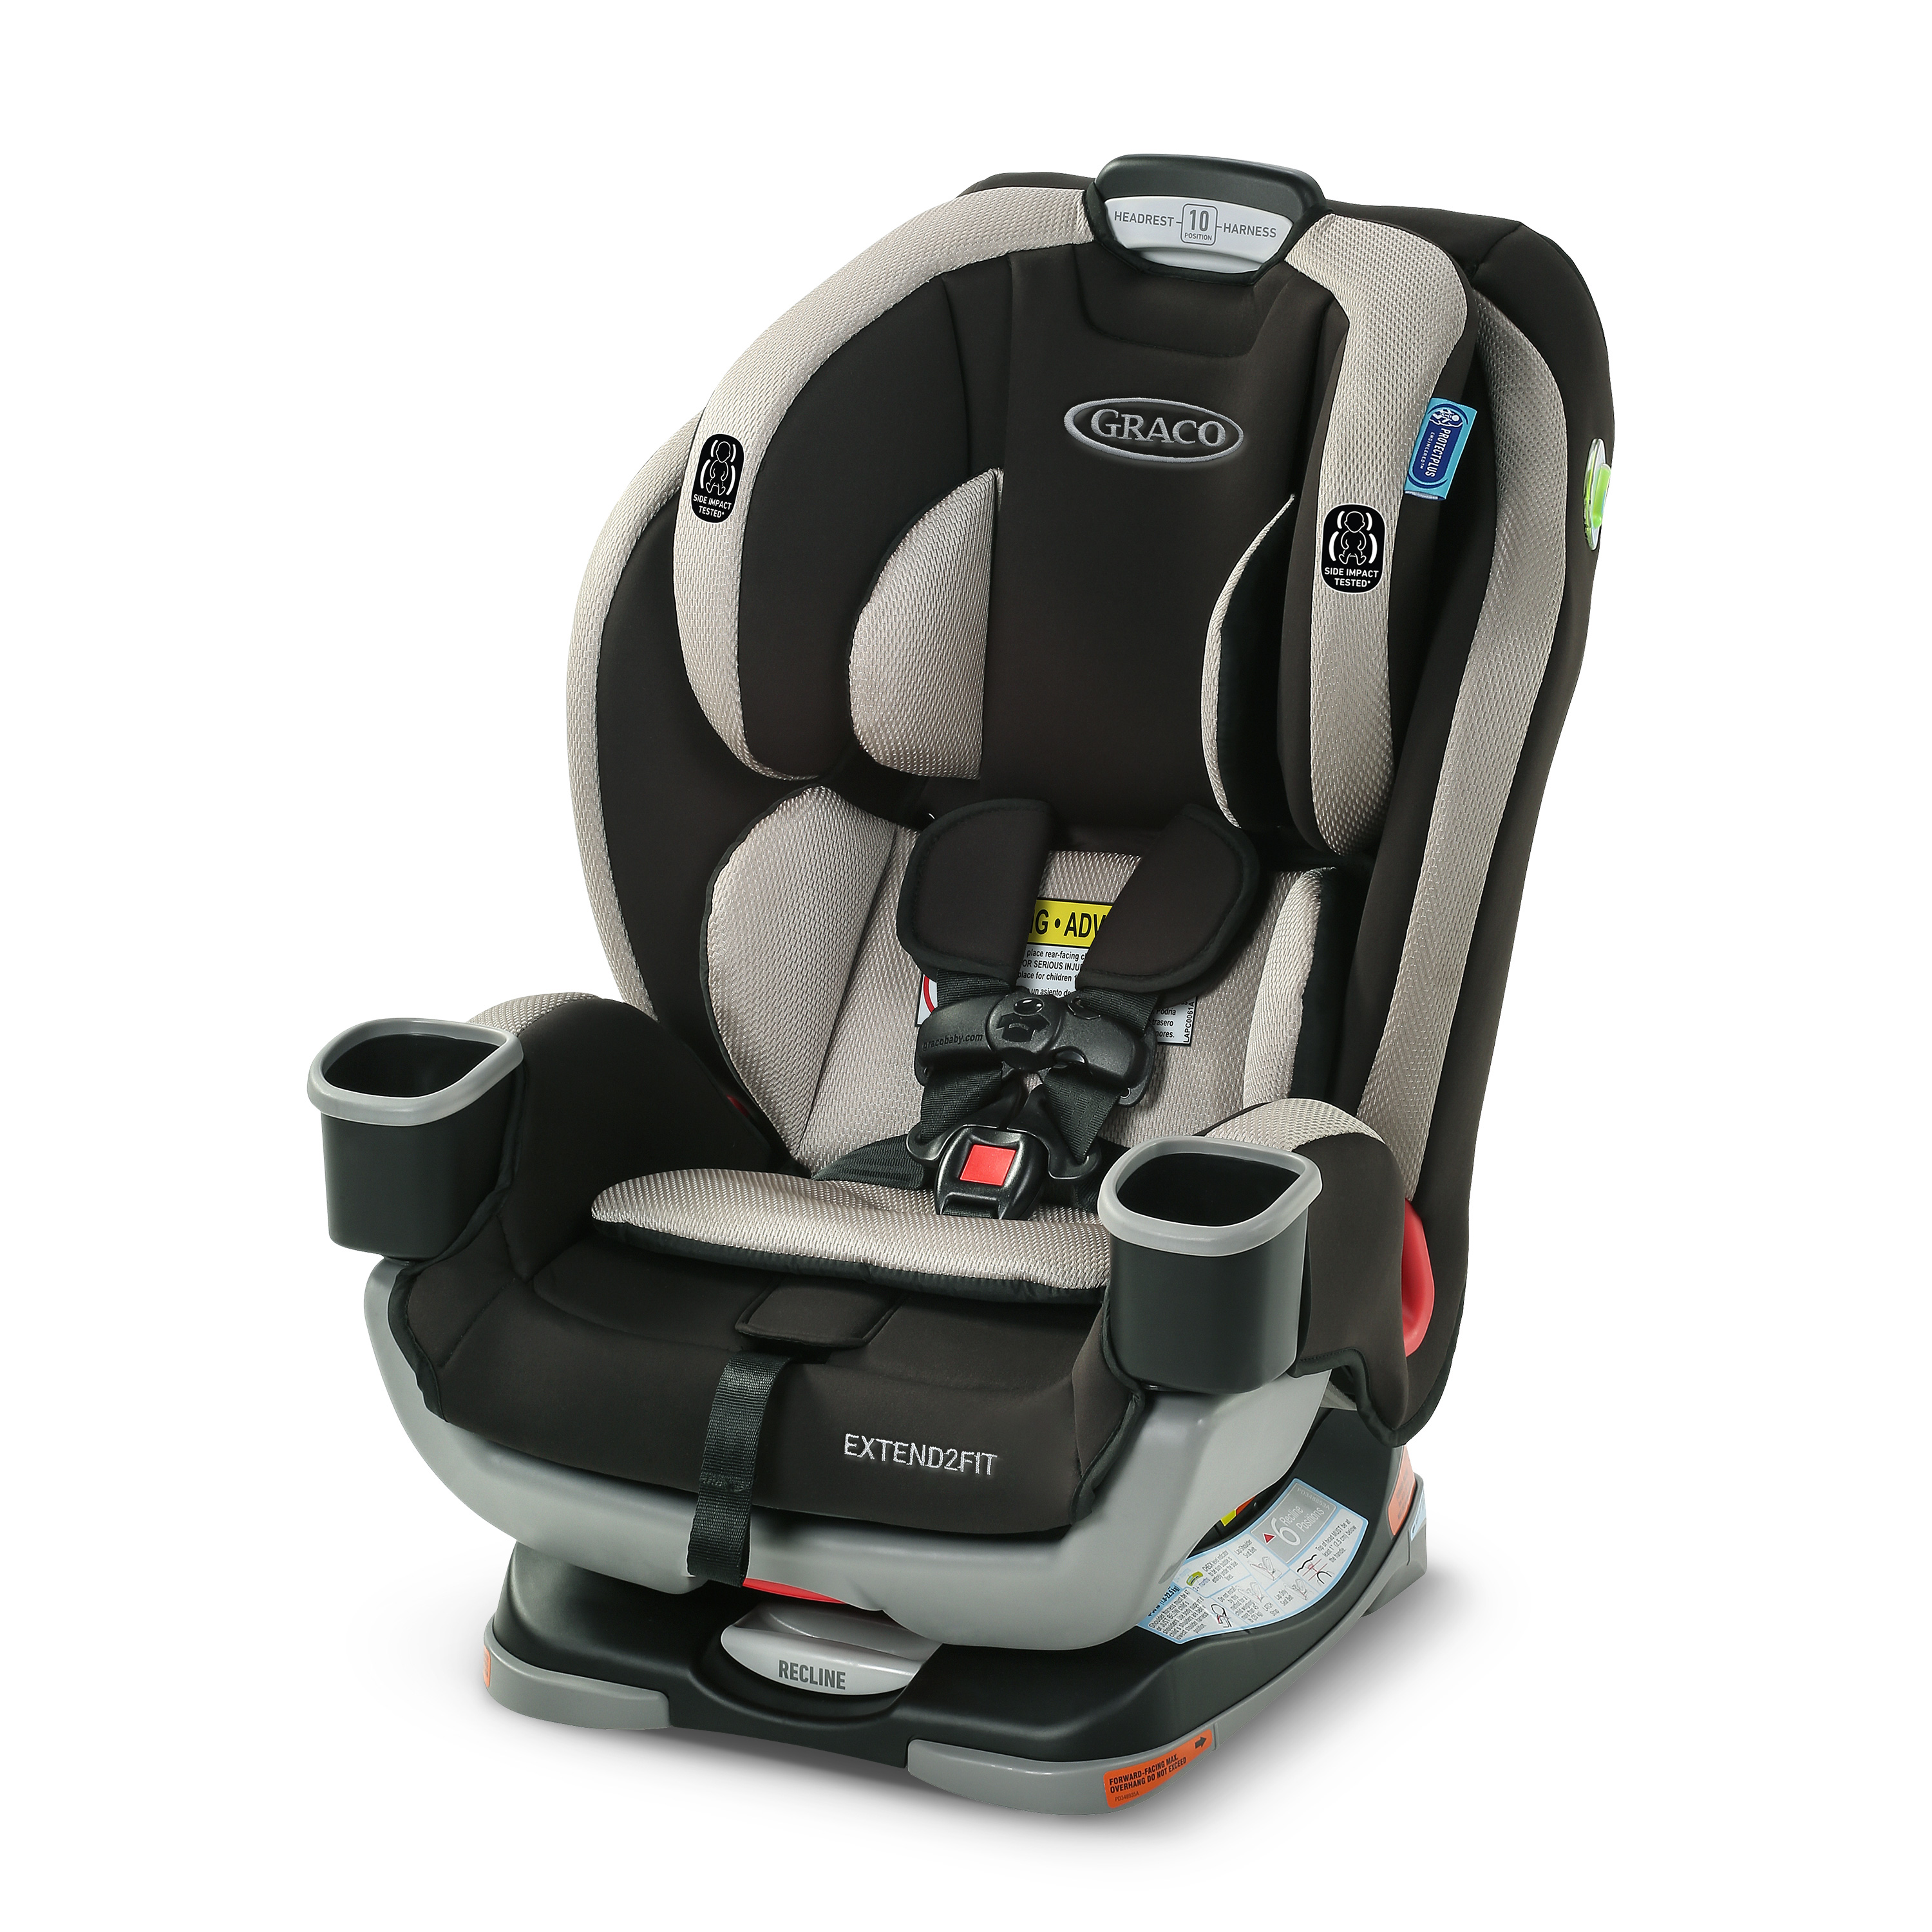 Graco Extend2Fit® 3-in-1 Car Seat, Stocklyn - image 1 of 7